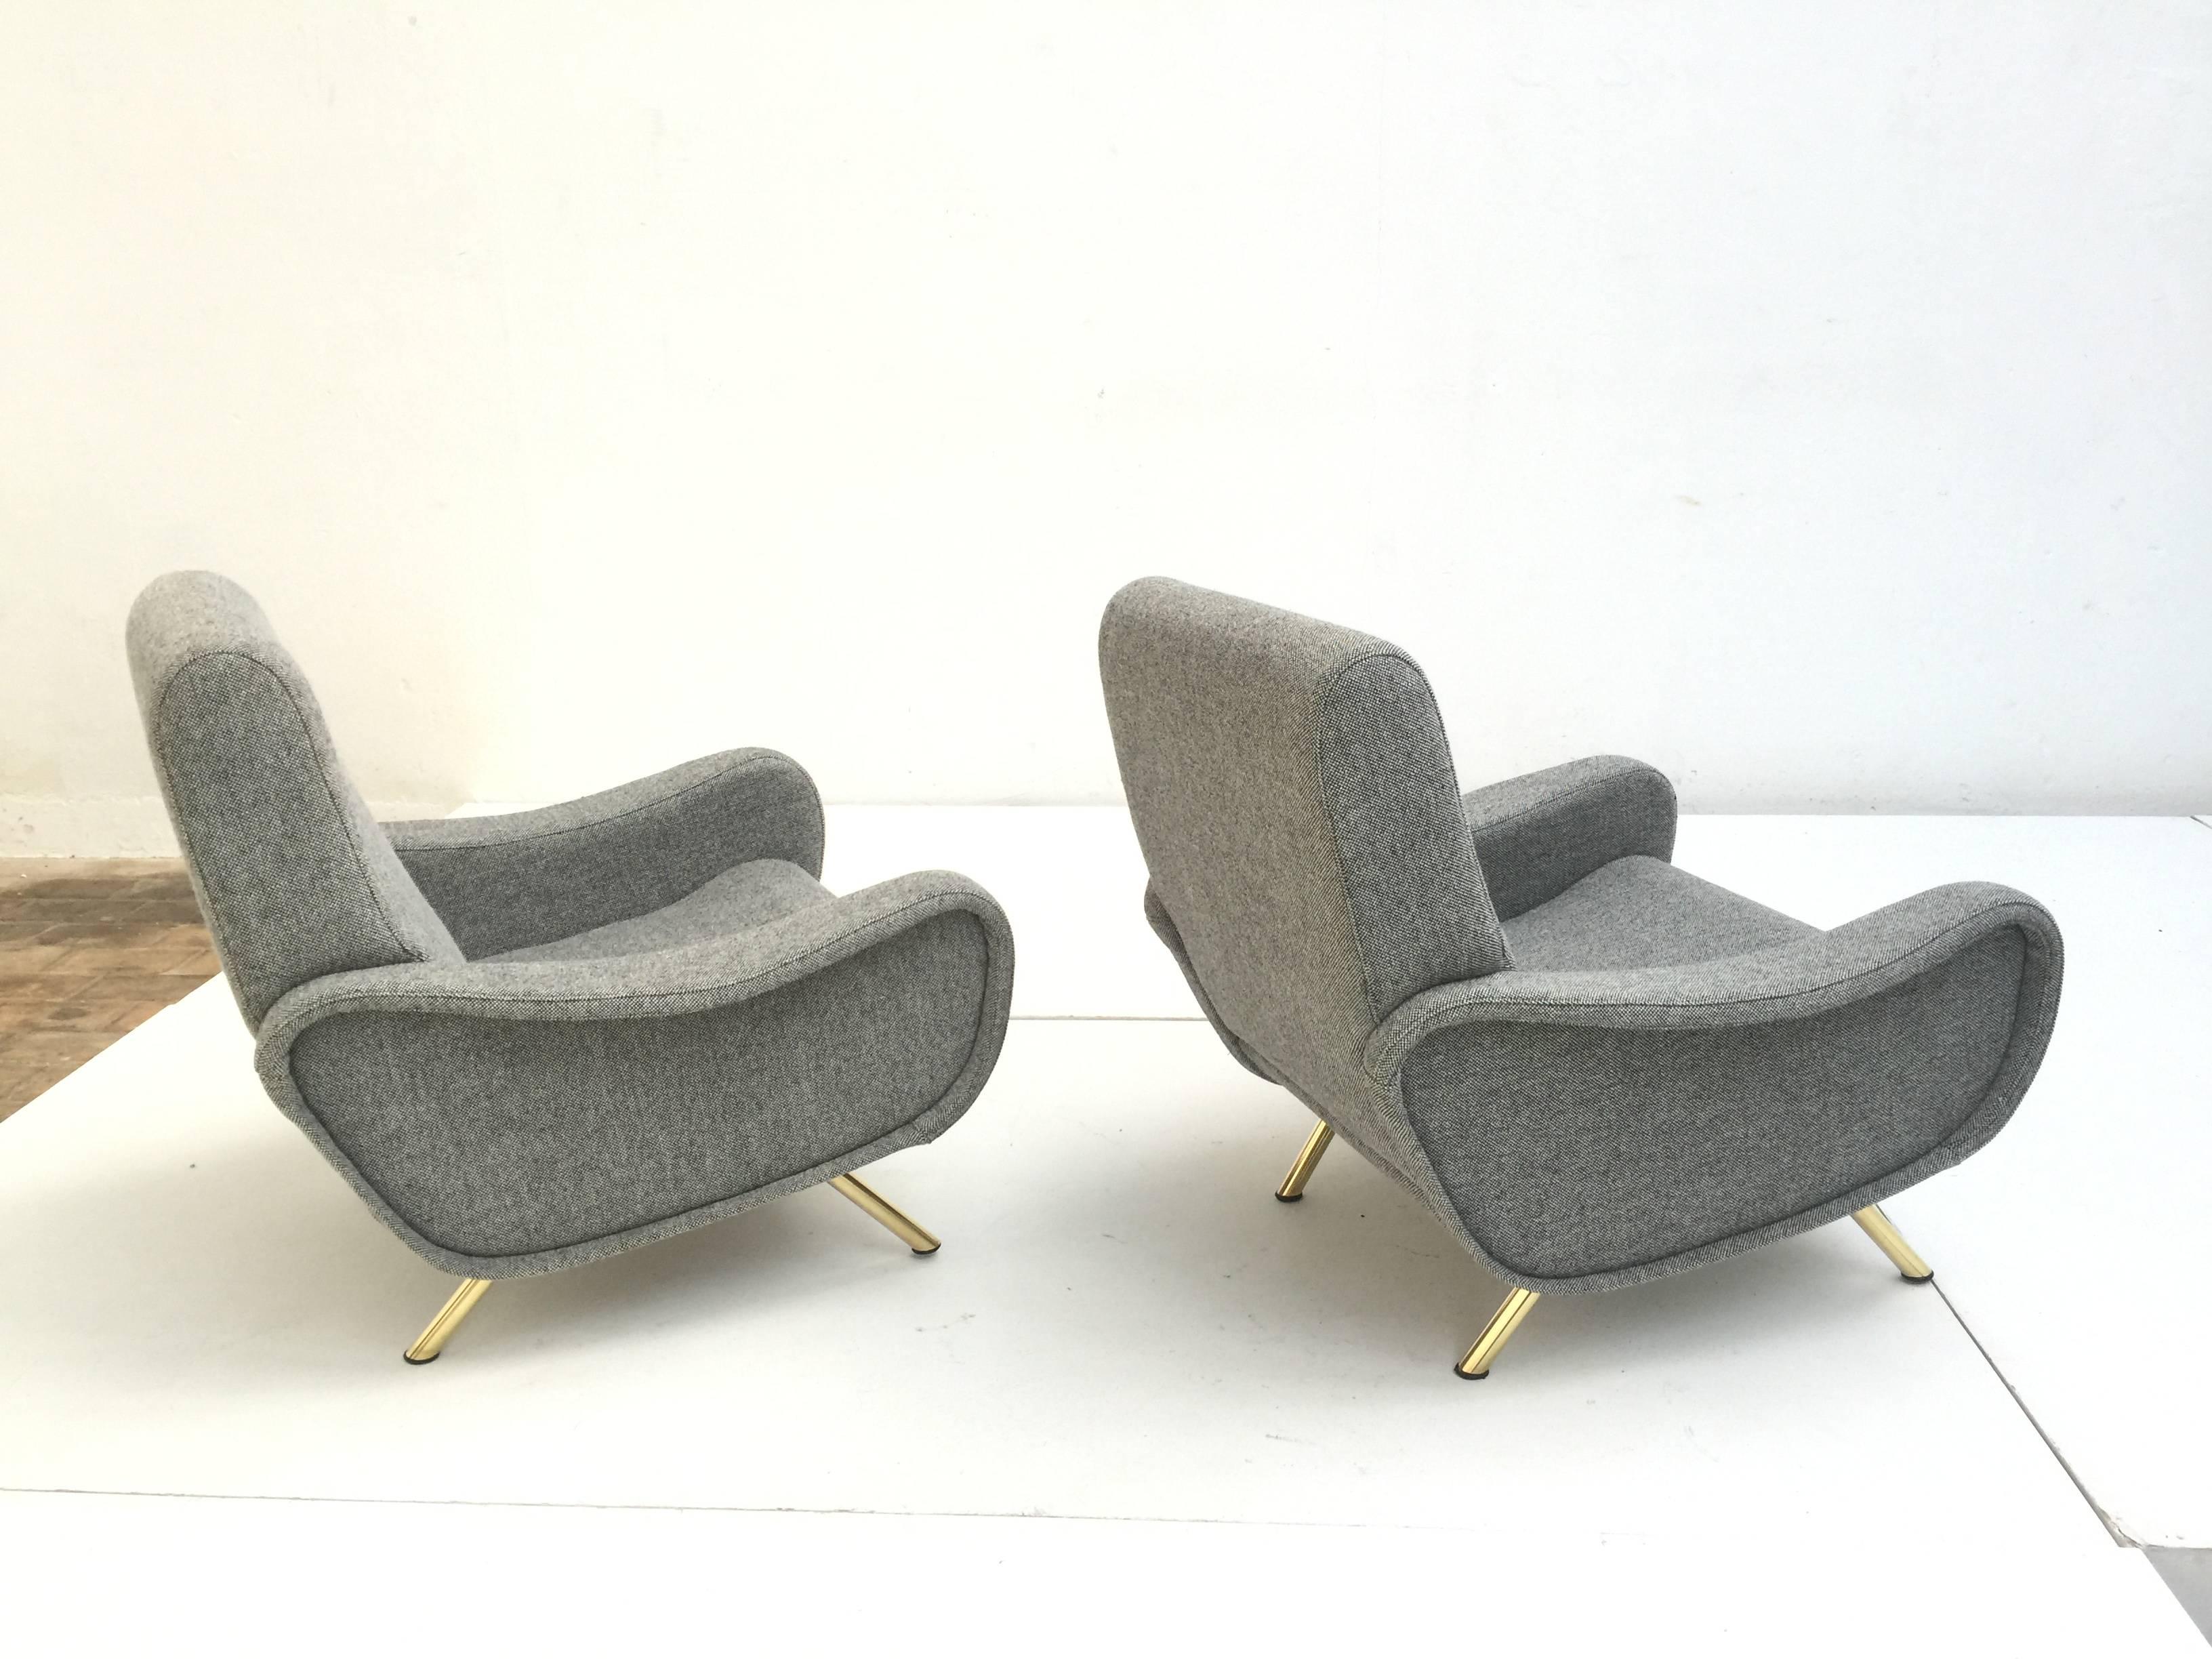 Superb pair of fully restored, iconic 'Lady' lounge chairs designed by Marco Zanuso for Arflex, Italy in 1951. This design won the Gold Medal prize at the 1951 'IX Triennale' international design exhibition in Milan.

The entire cover page of